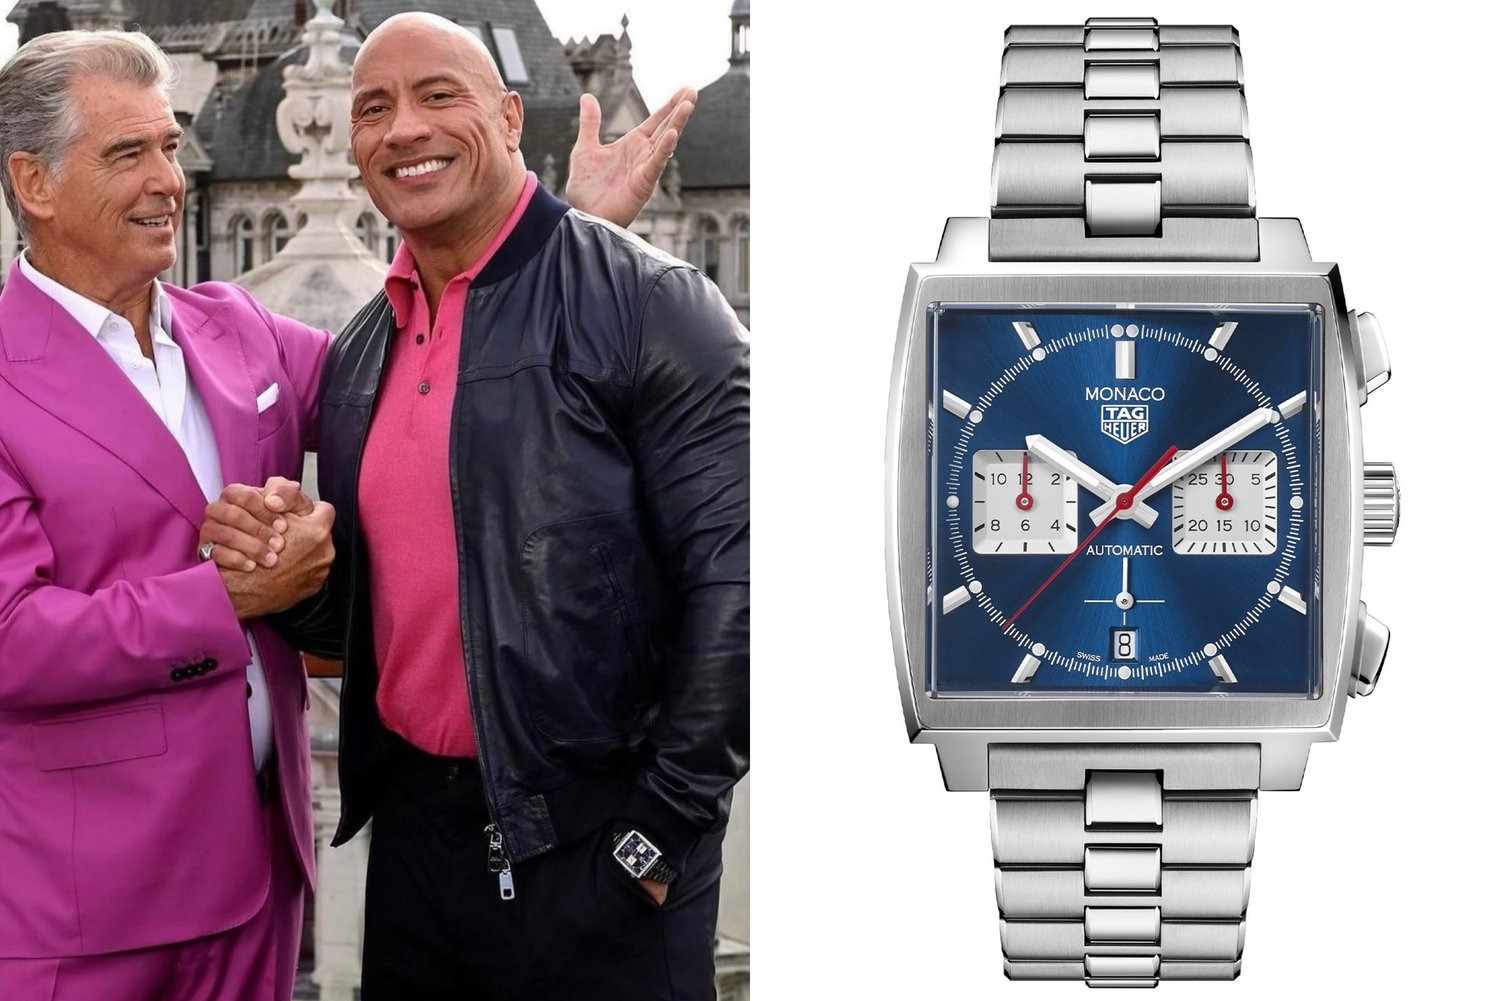 Admire the most expensive watches in The Rock’s personal collection